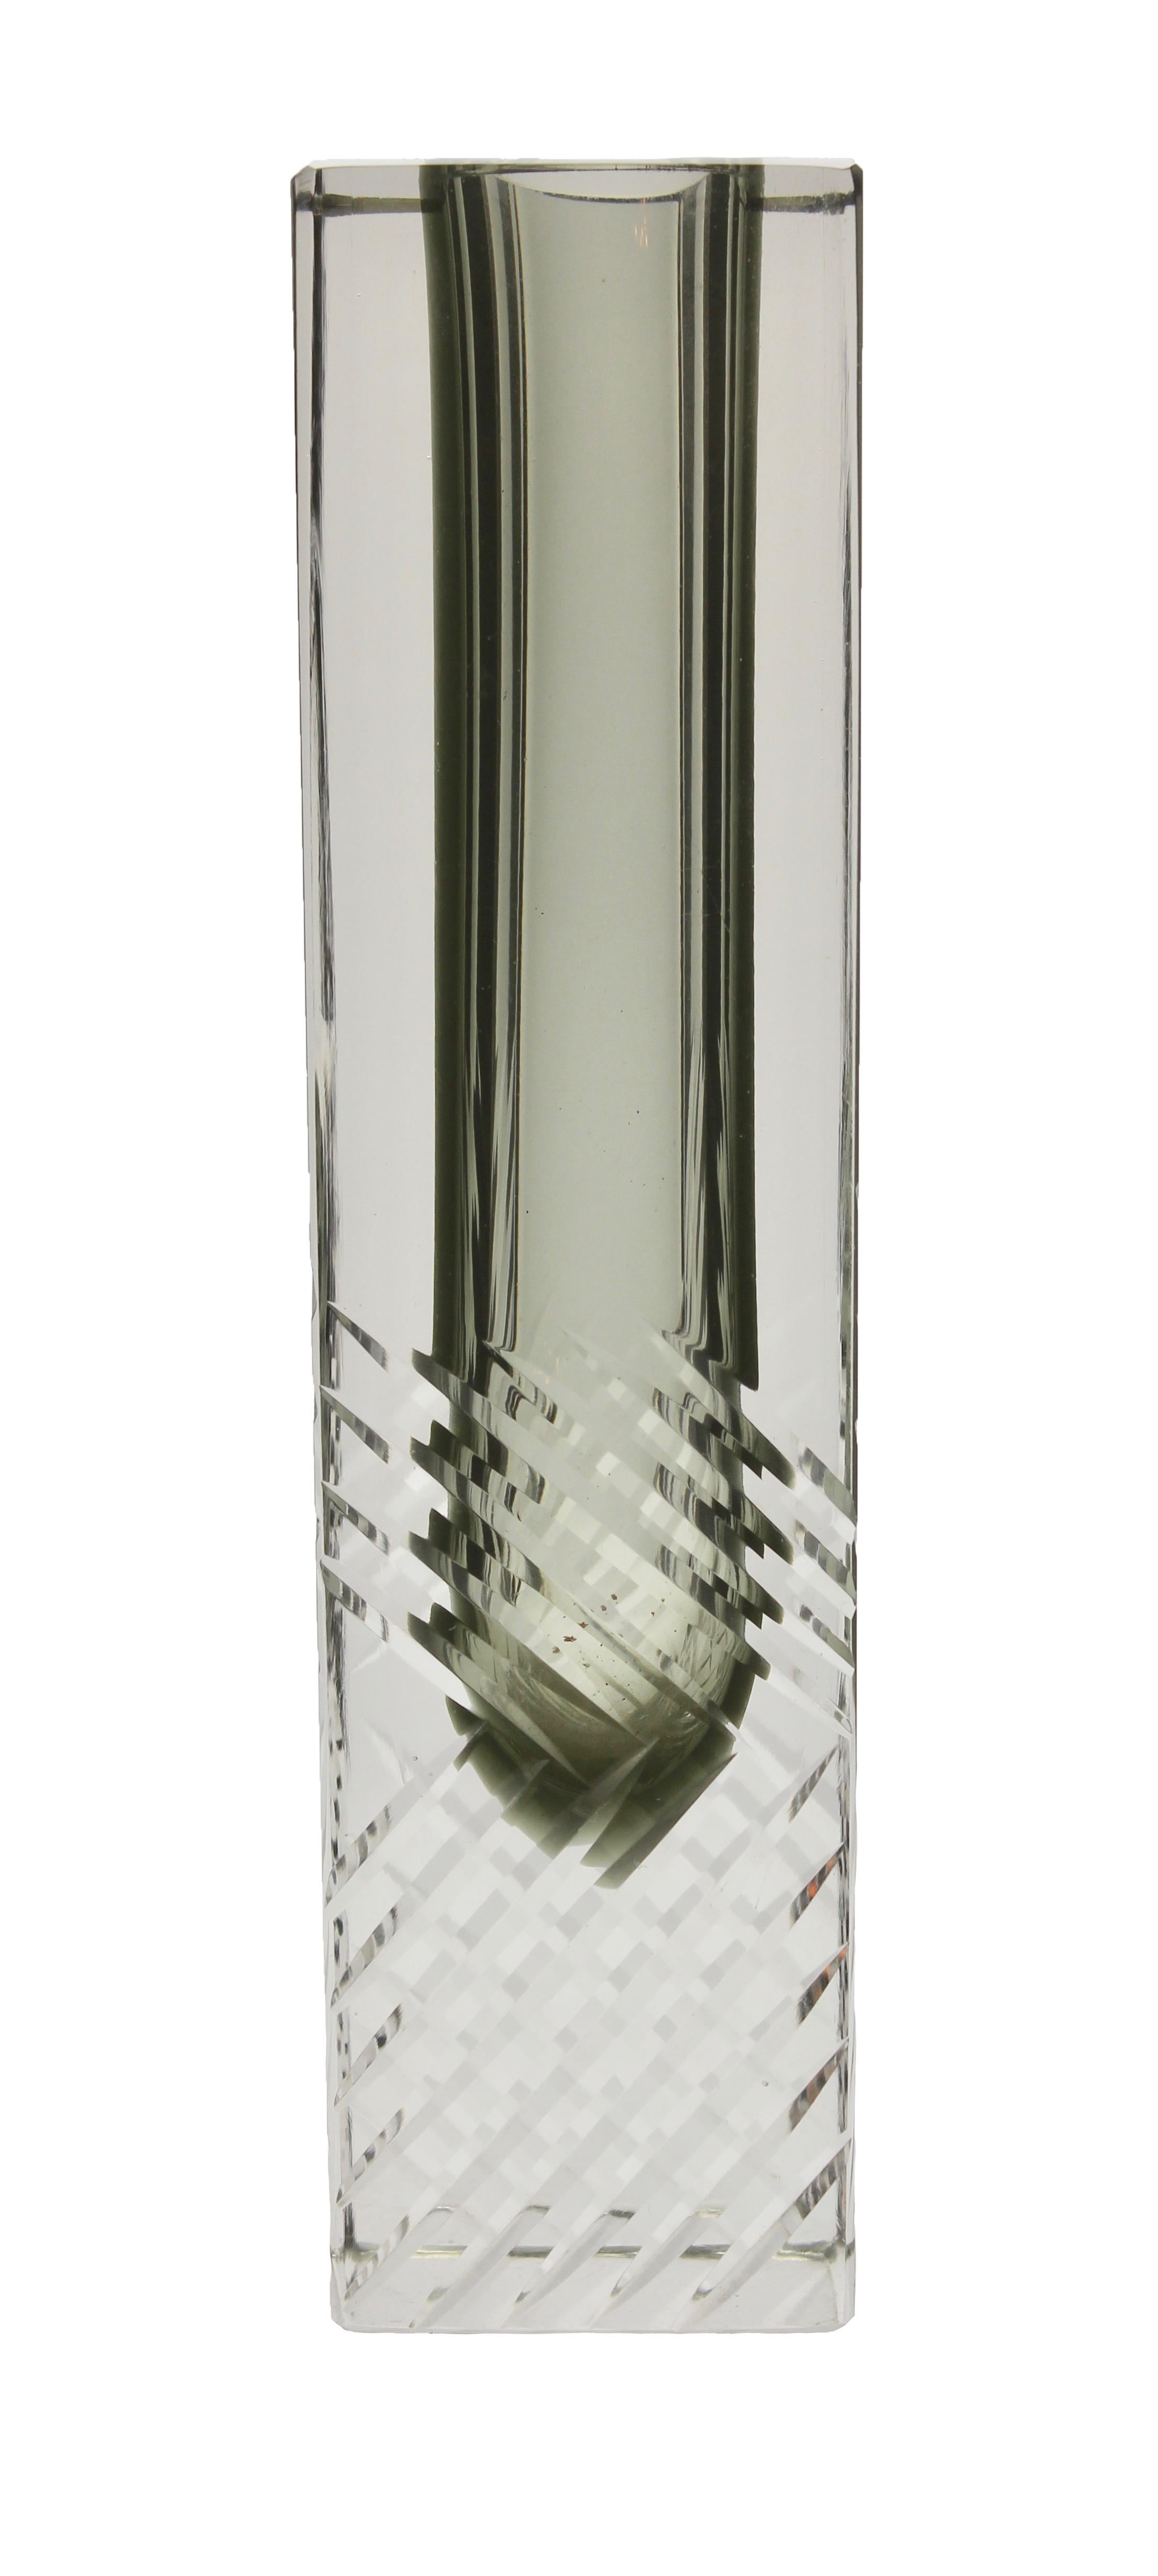 Inspired by the Classic design by Flavio Poli for Mandruzzato, this stylish Murano vase is made from an inner sheath of Smokey grey in a block of lead crystal, which has been handcut with diagonal lines to give an unusual optical effect.
Restrained